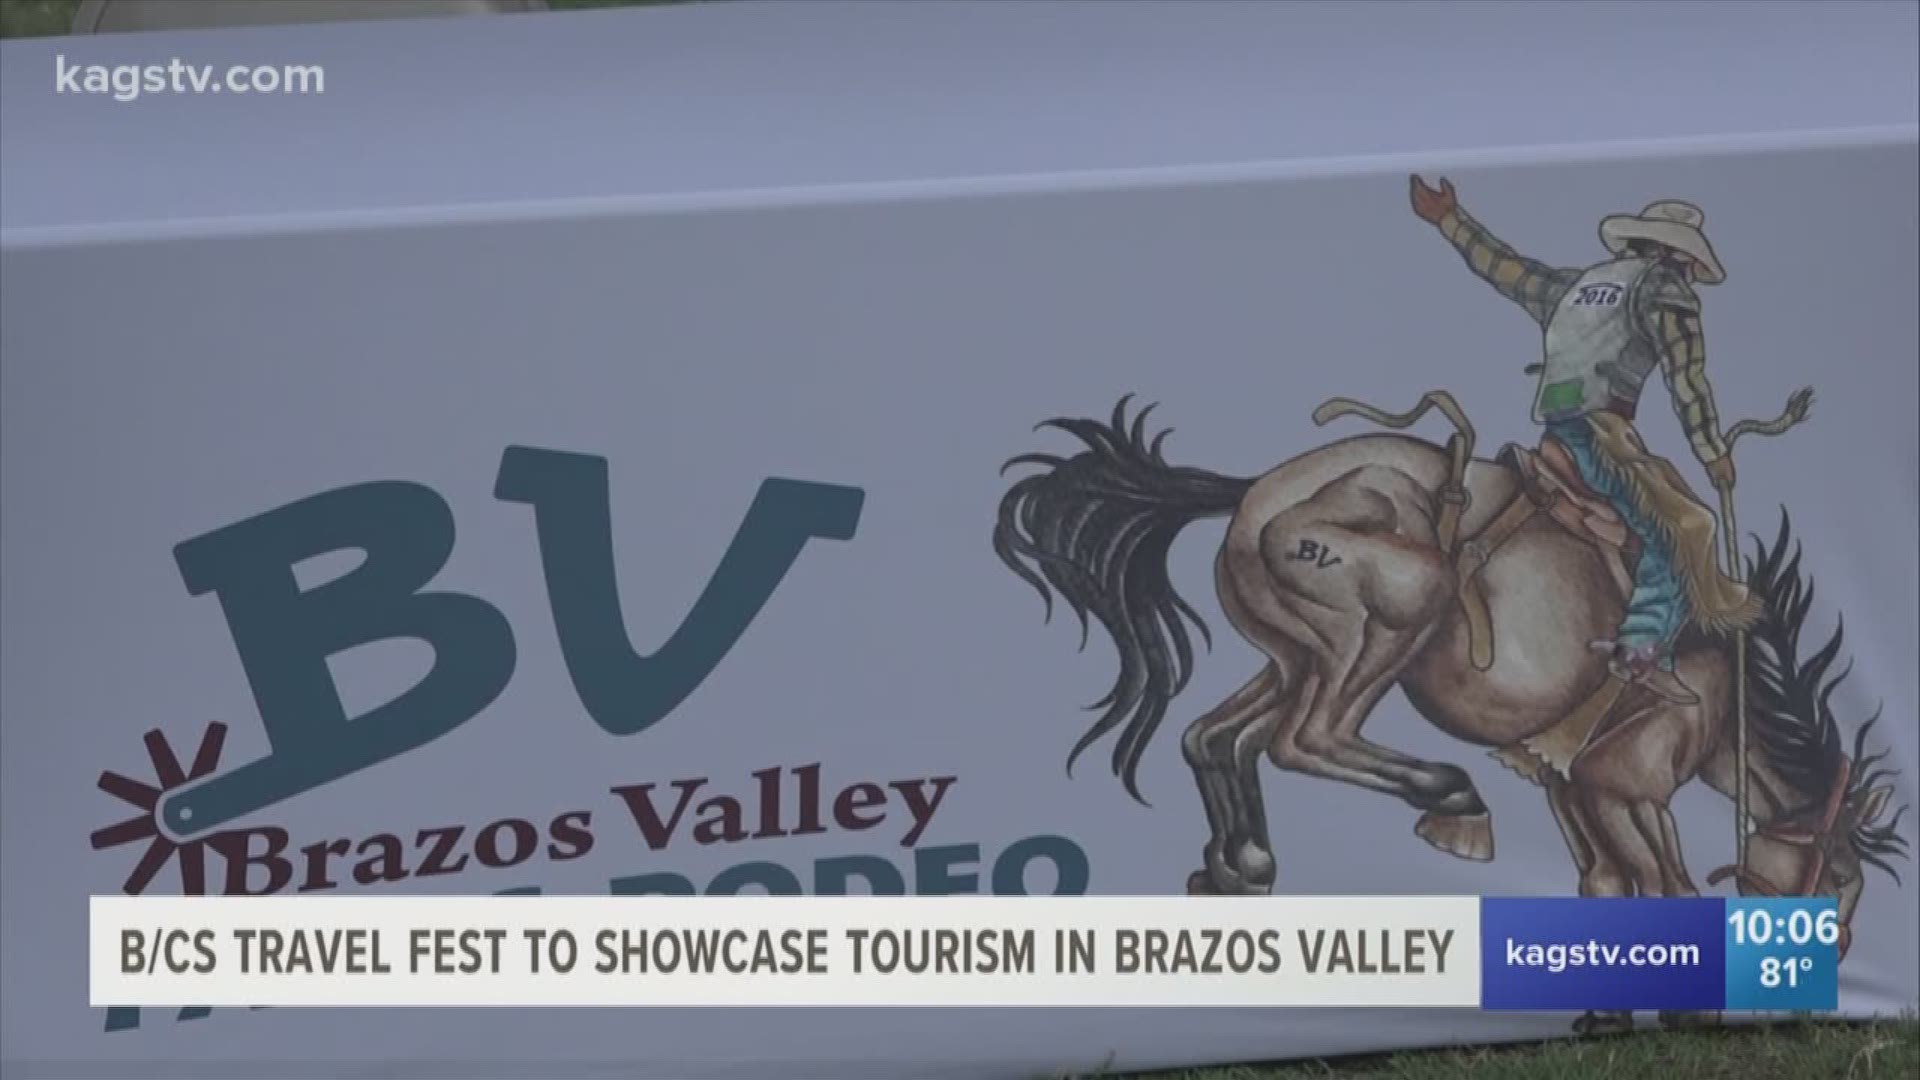 30 local businesses gathered to show what the Bryan/College Station area has to offer.